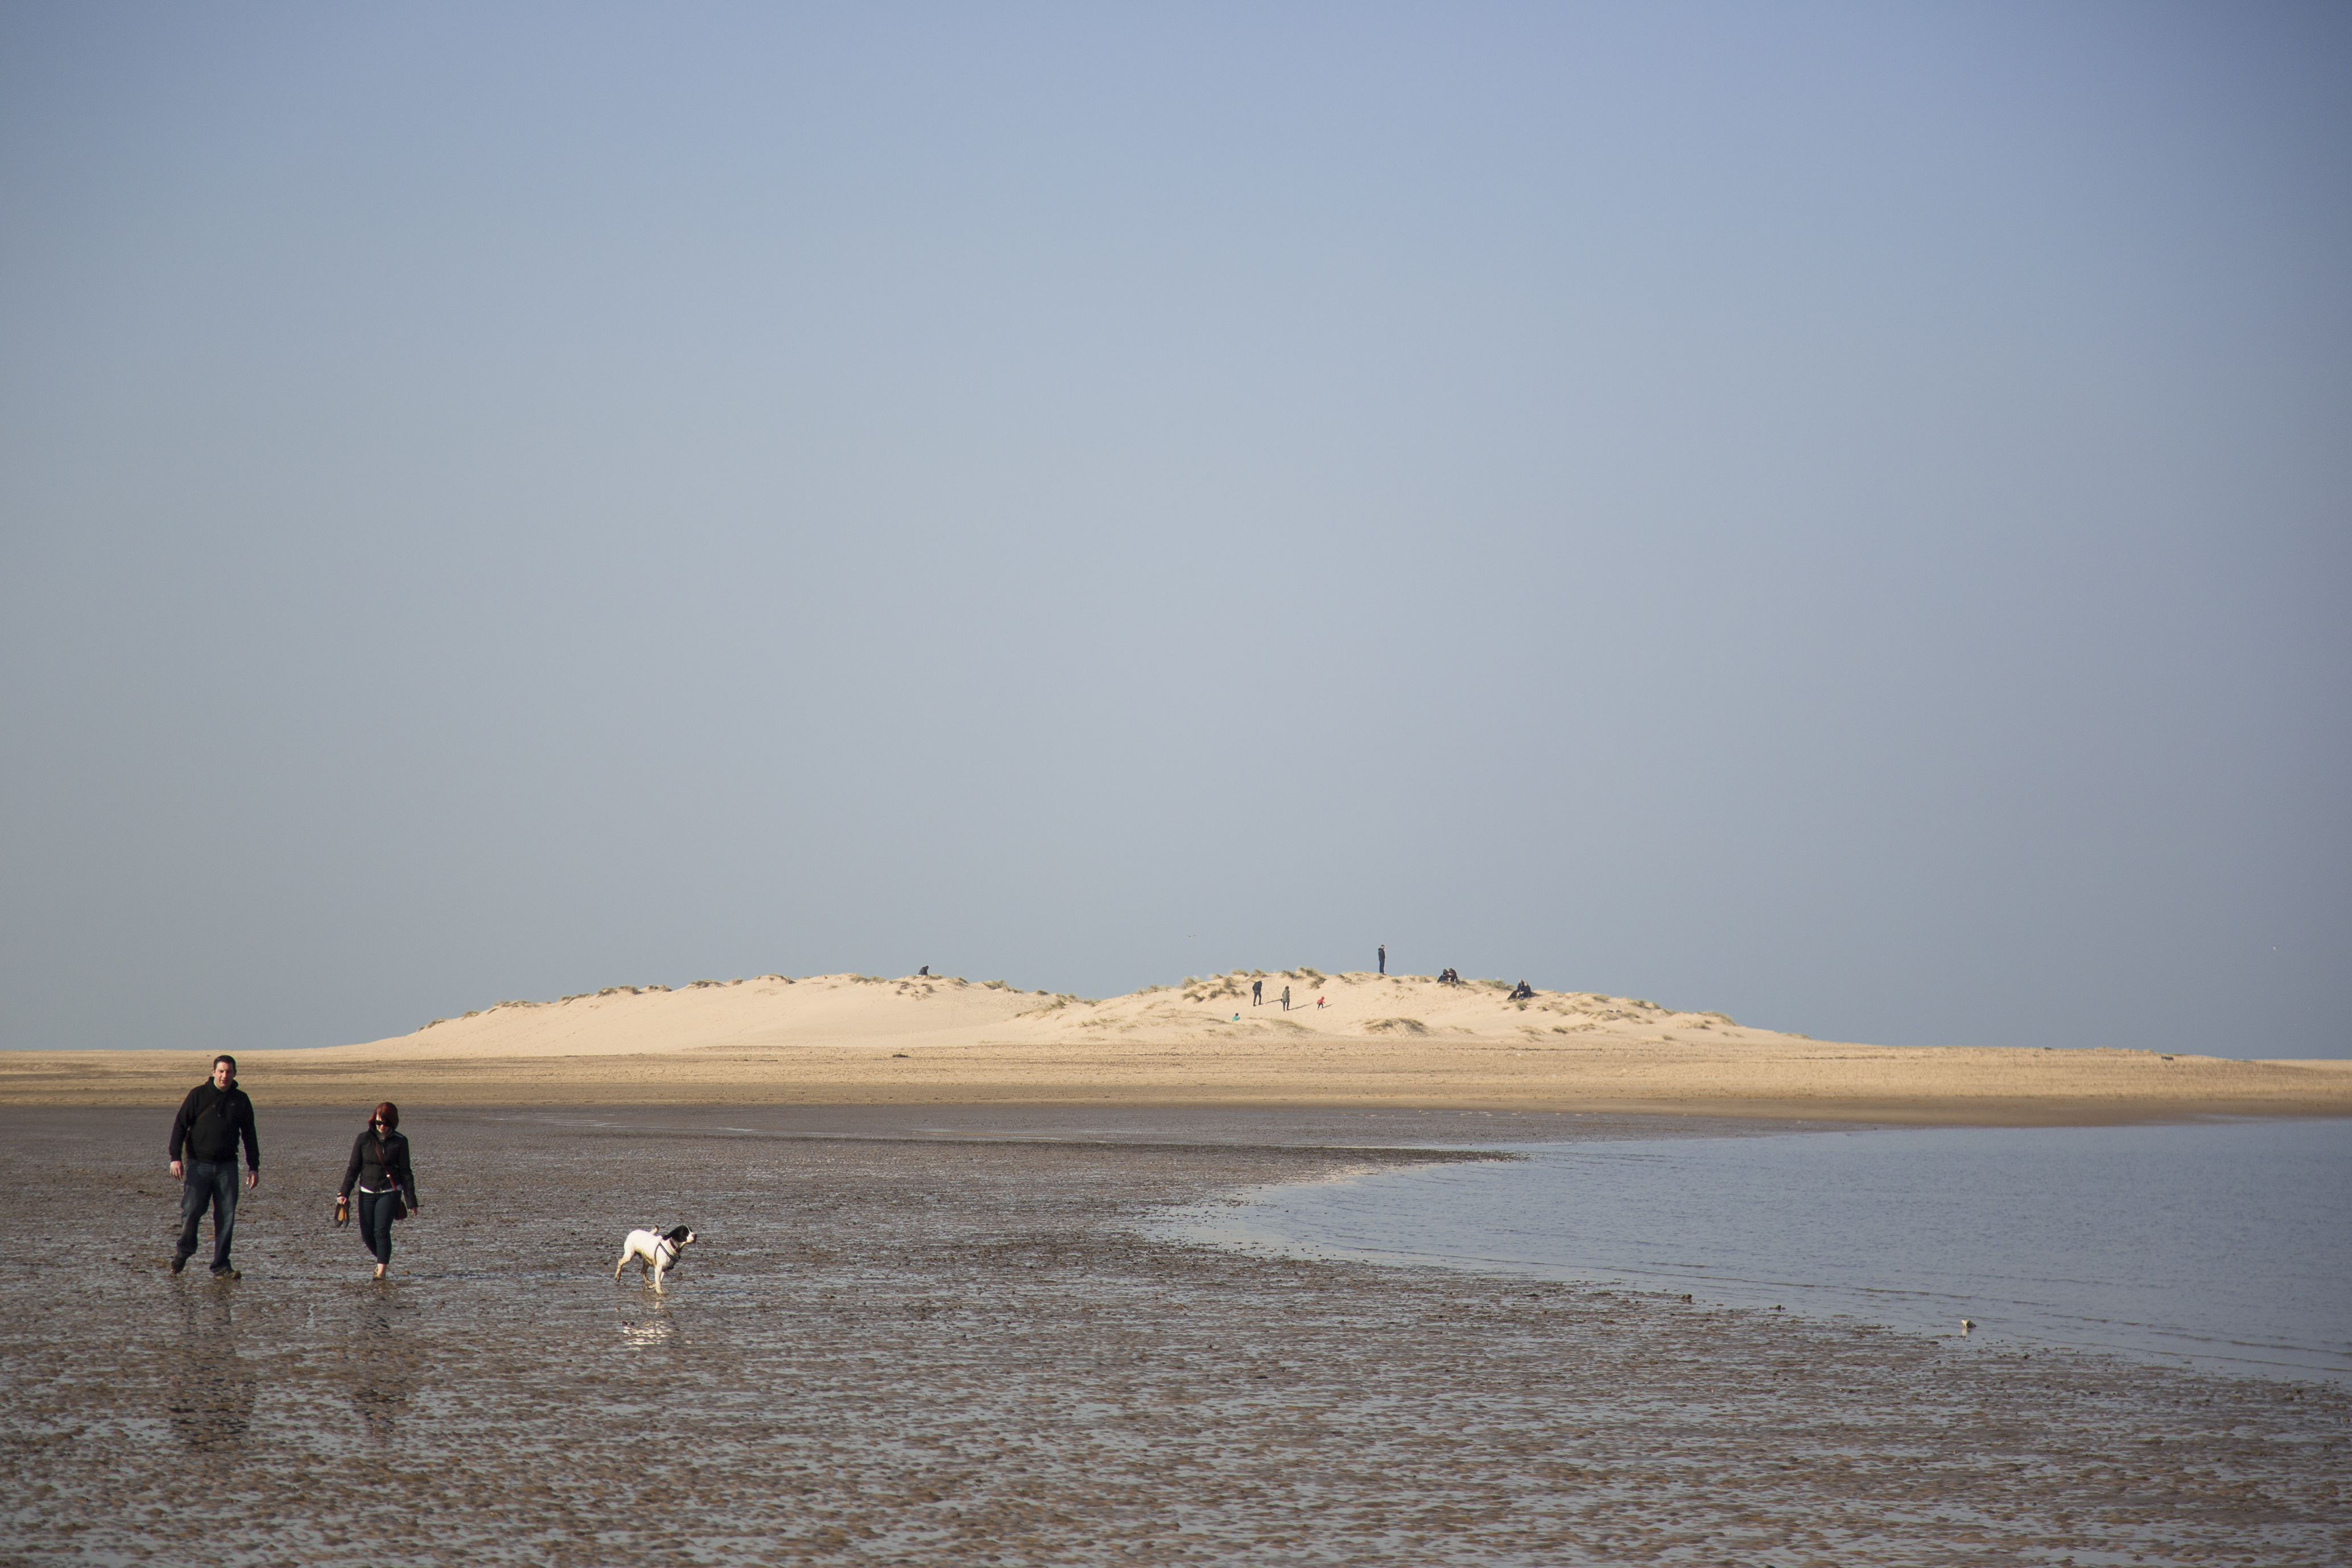 A couple walk their dog along Holkham Beach in Norfolk, with the sand dunes of Holkham National Nature Reserve visible in the background